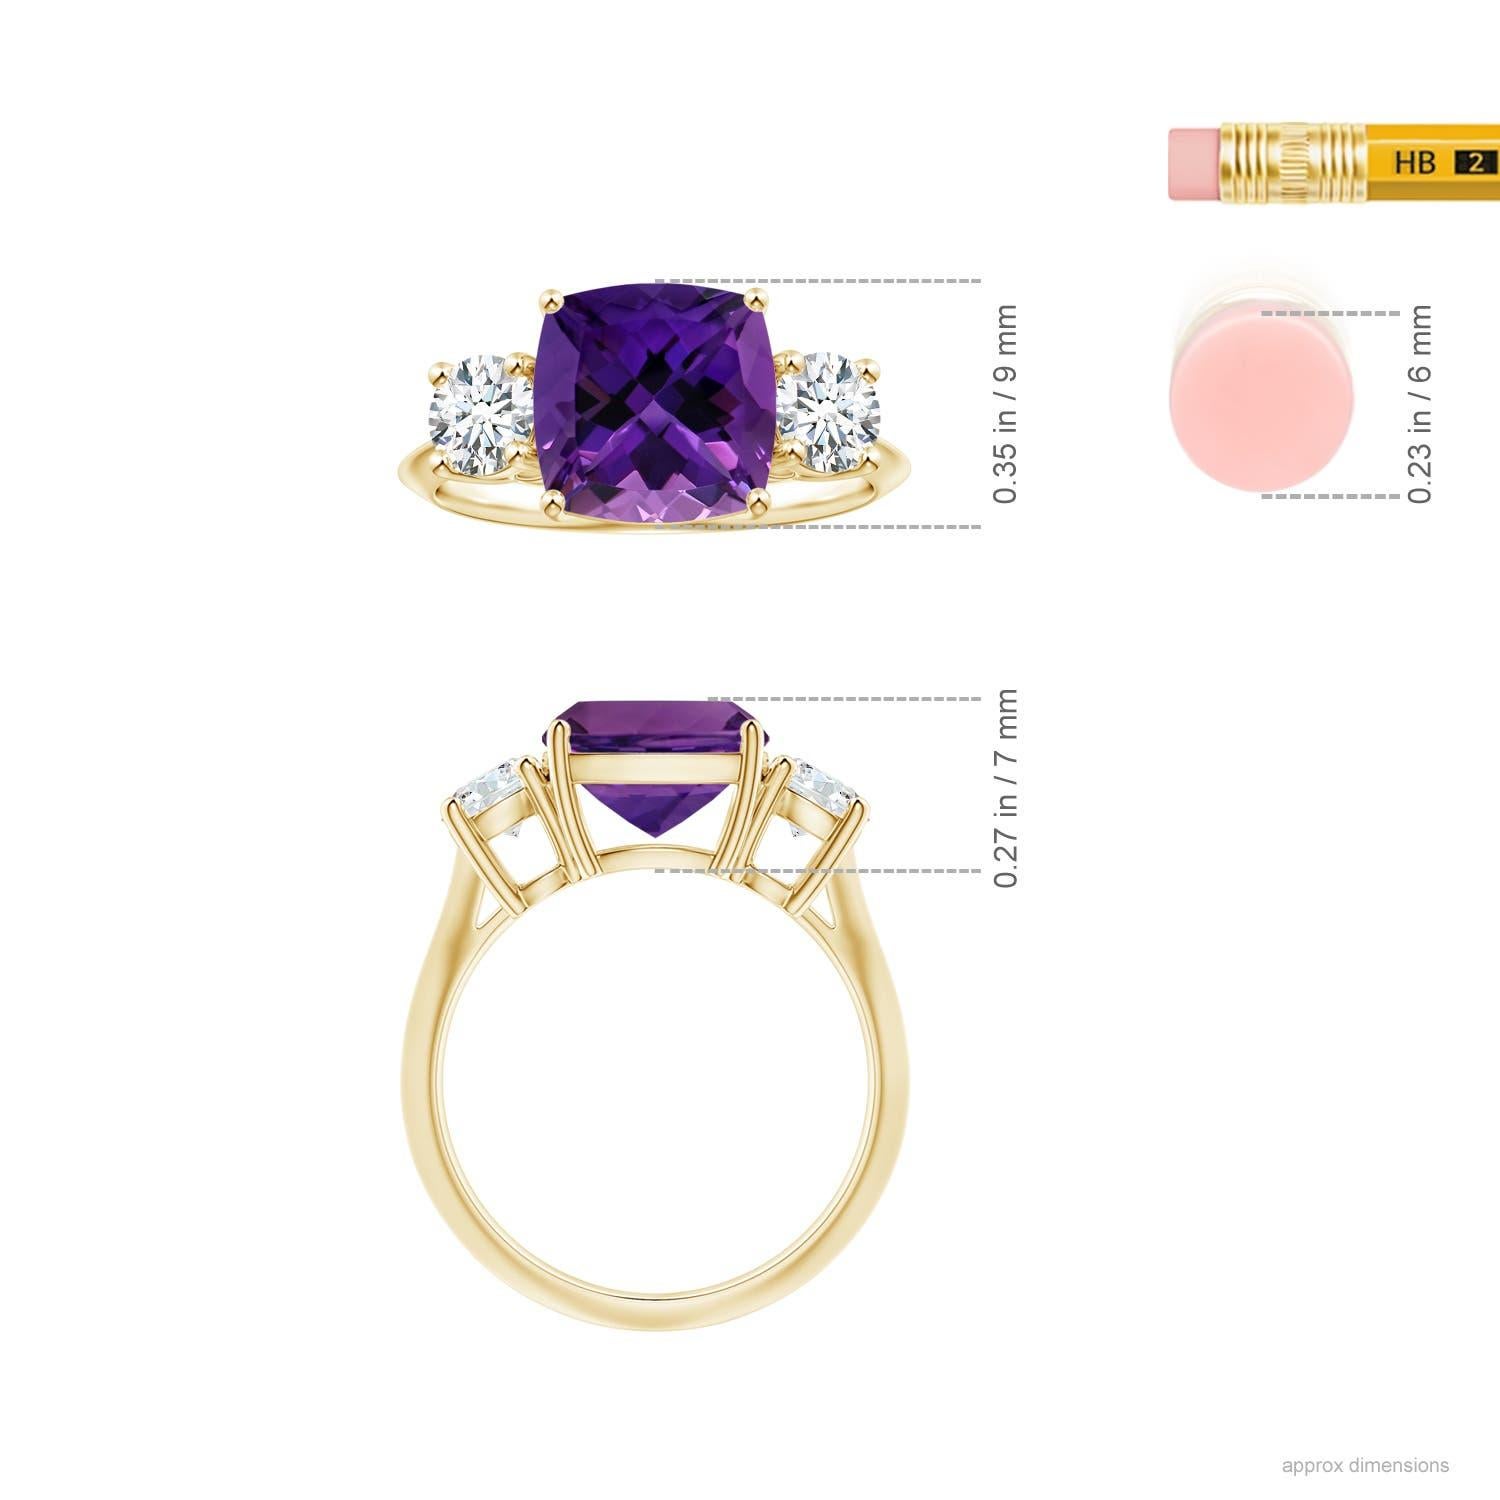 For Sale:  ANGARA 3-Stone GIA Certified Cushion Amethyst Ring in Yellow Gold with Diamonds 5